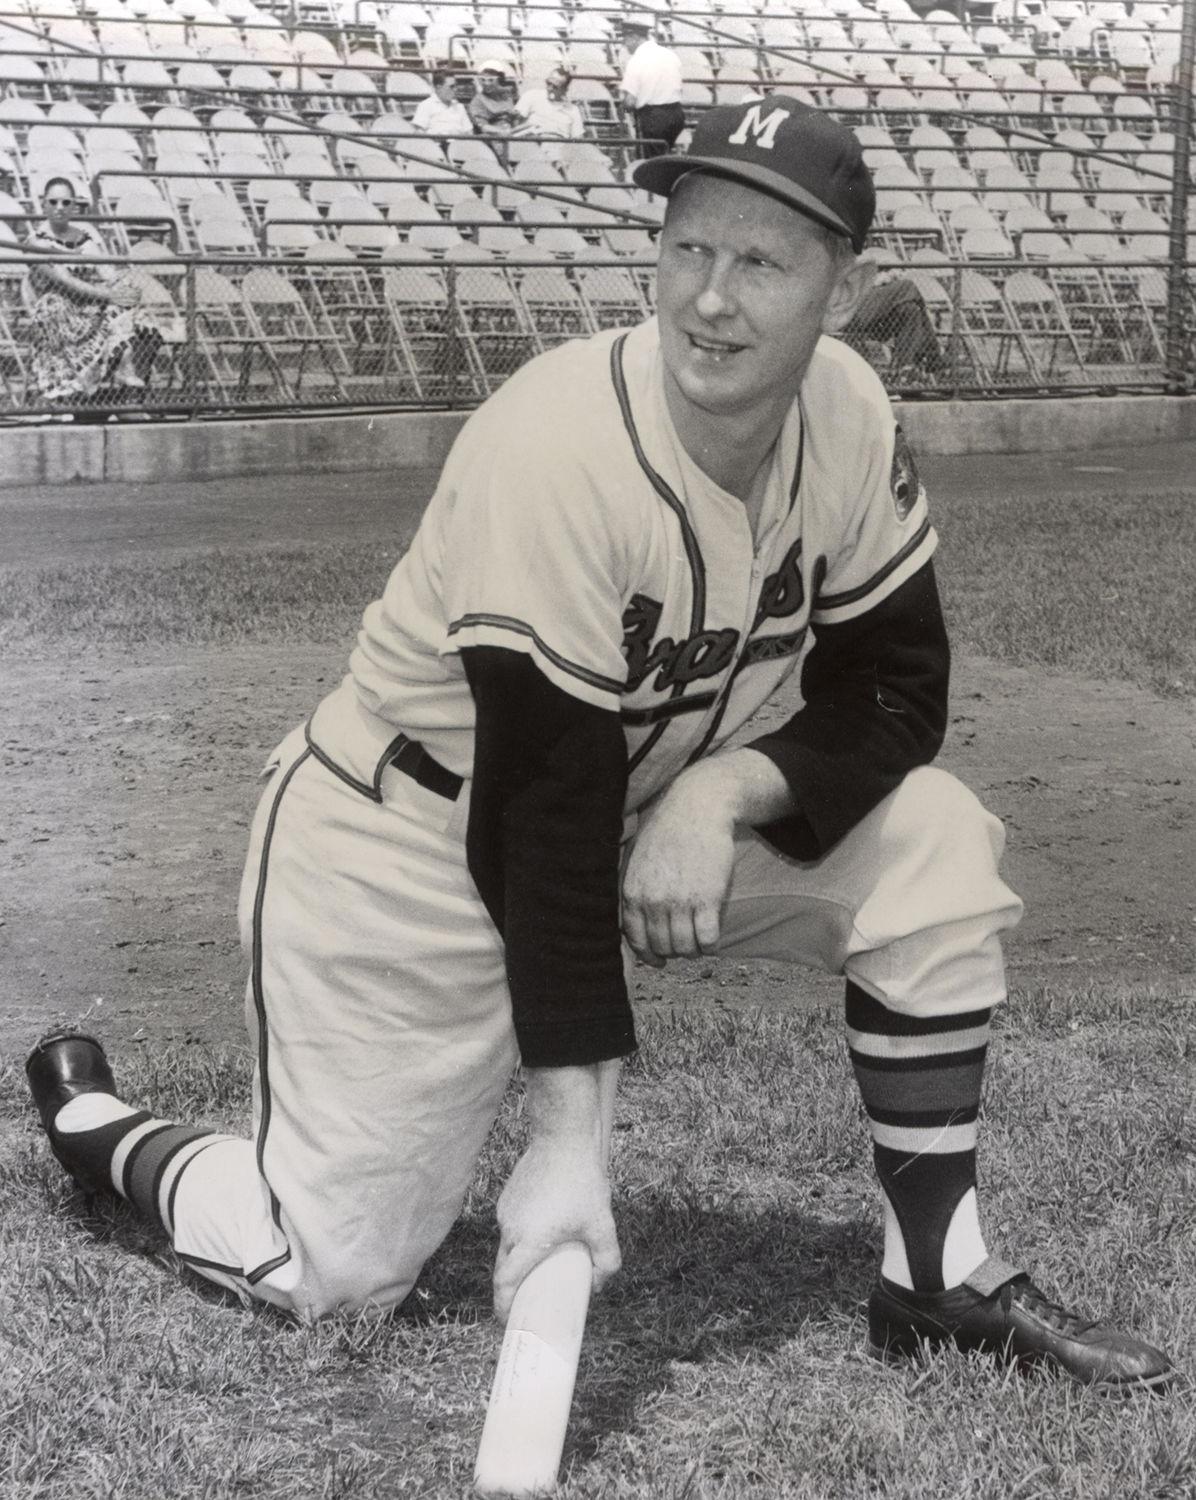 Red Schoendienst Inducted Into the Milwaukee Braves Honor Roll